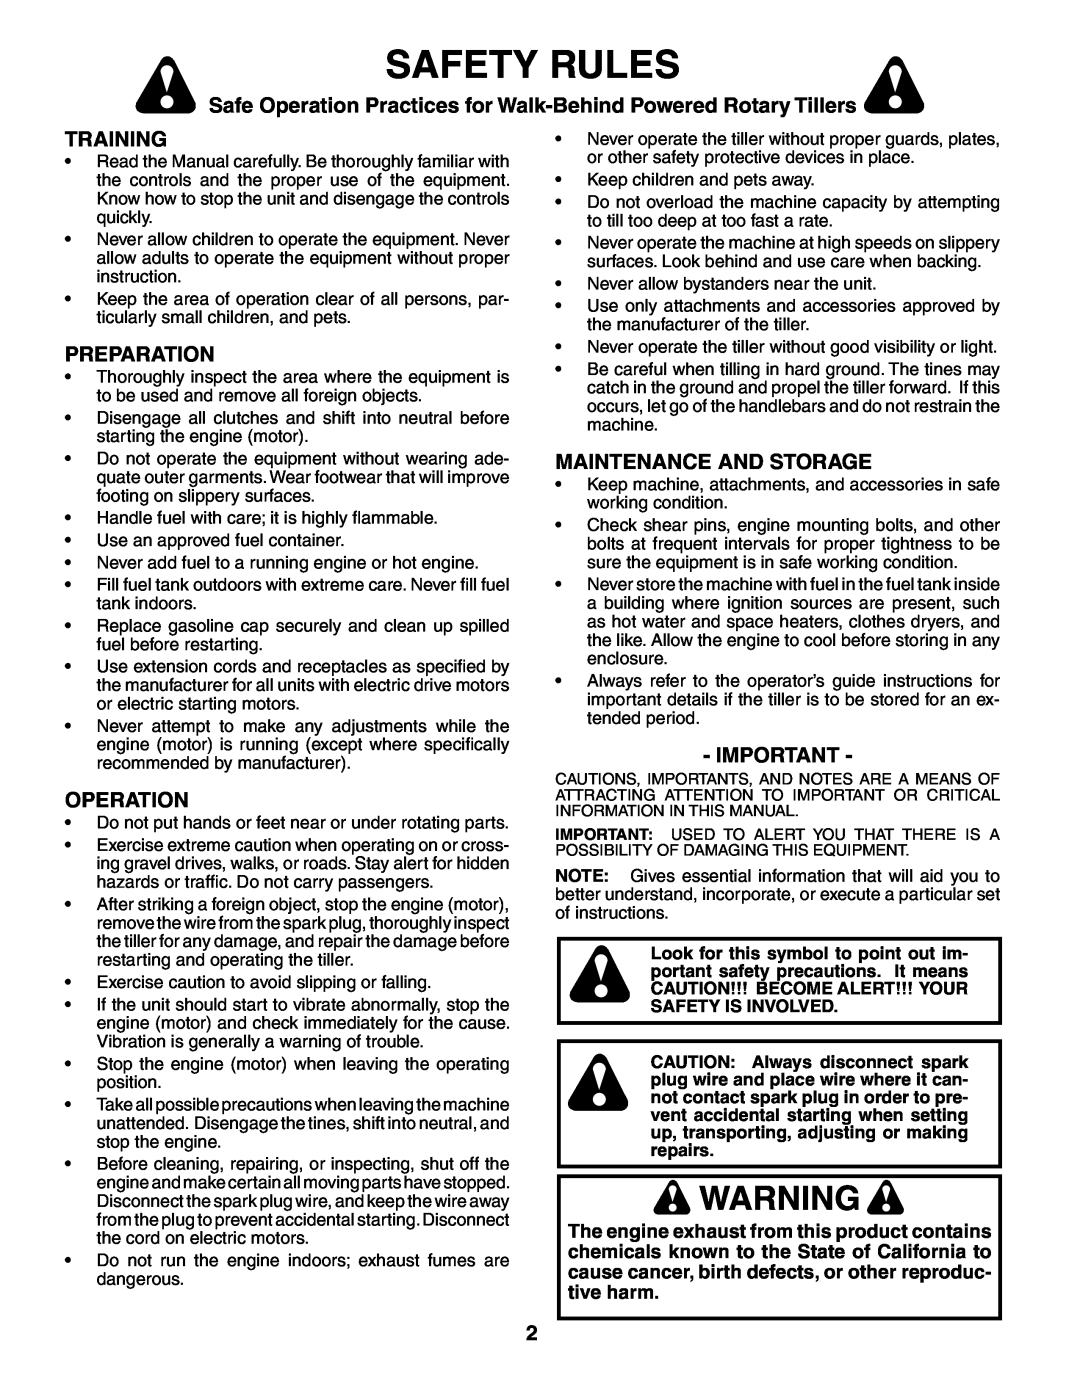 Poulan PRRT65 manual Safety Rules, Safe Operation Practices for Walk-Behind Powered Rotary Tillers, Training, Preparation 